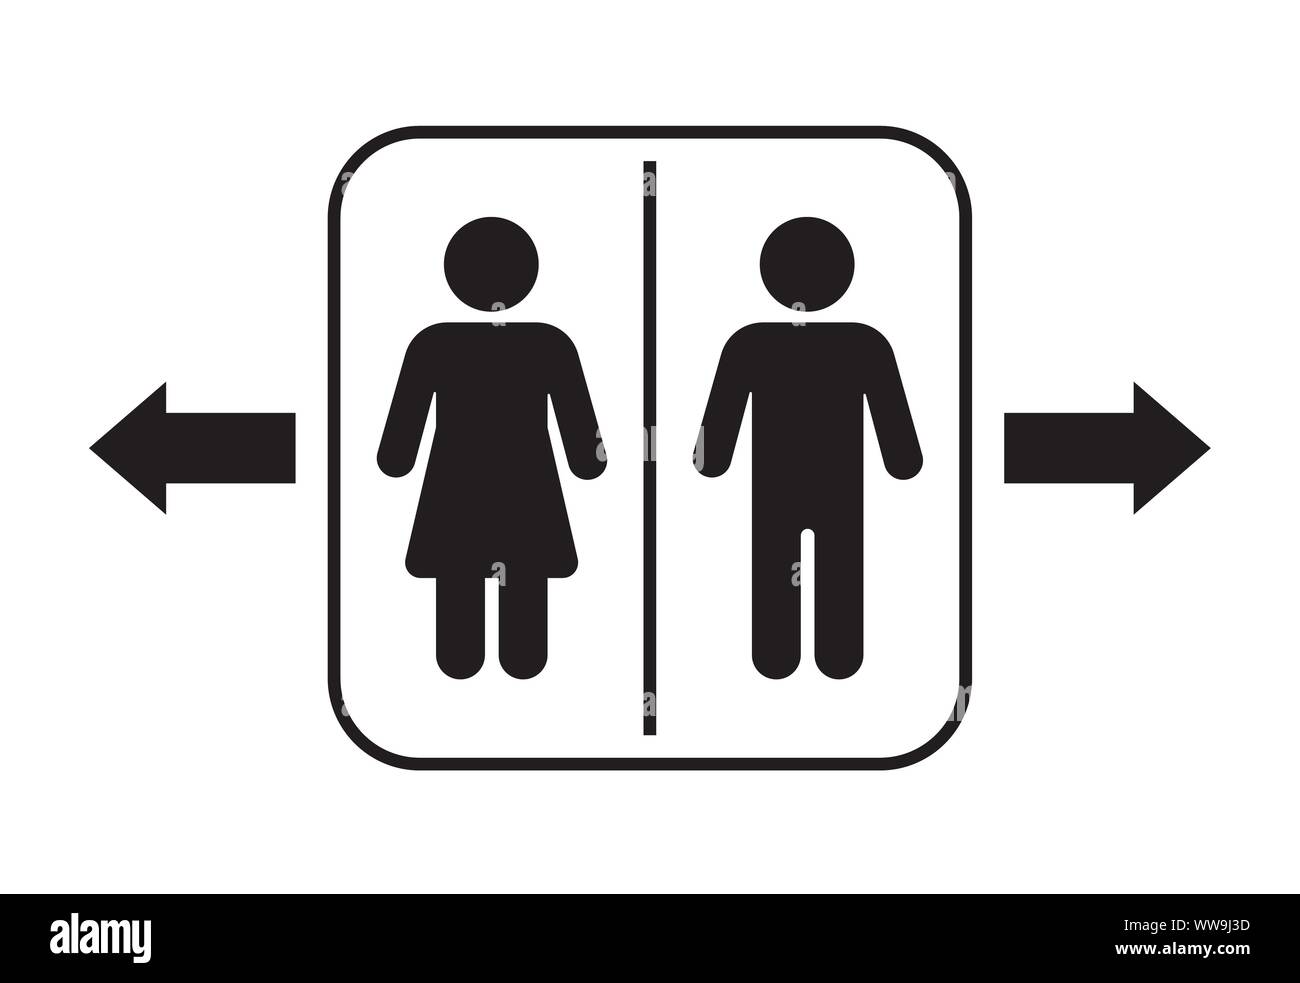 toilet signs Stock Vector